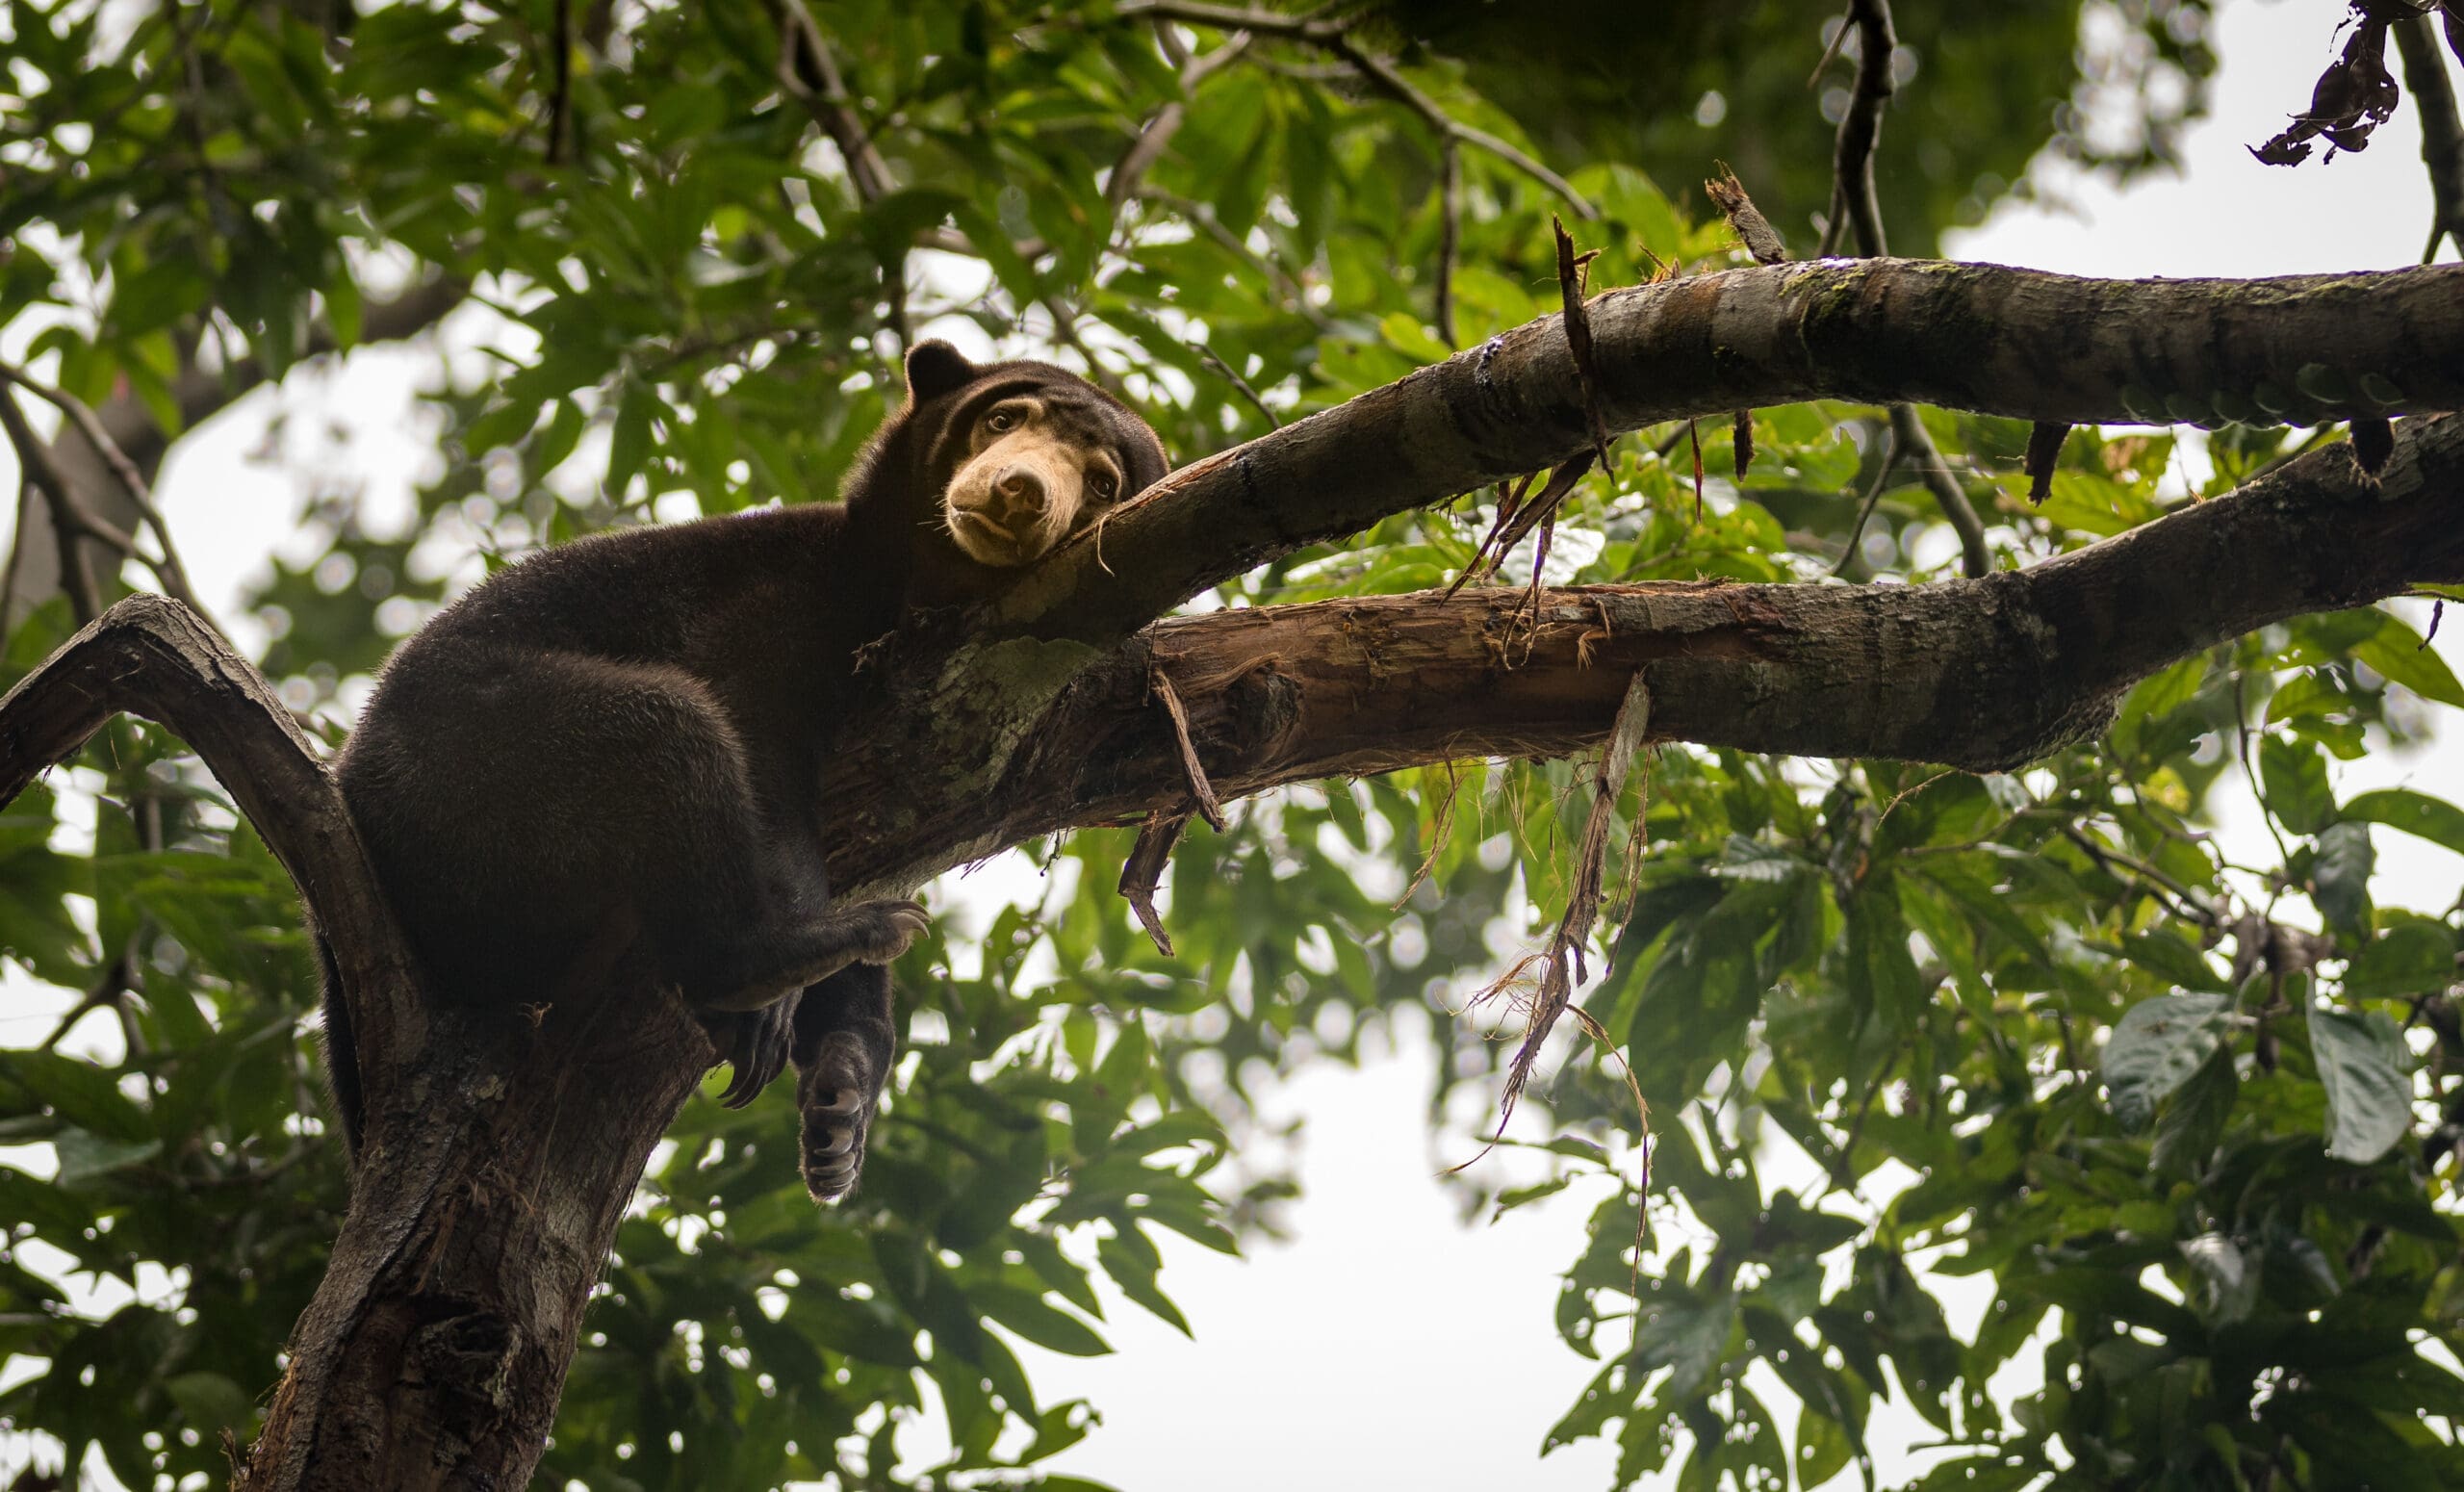 Malayan sun bear resting on a tree, with a tired and depressed look on its face. Sepilok, Borneo, Malaysia